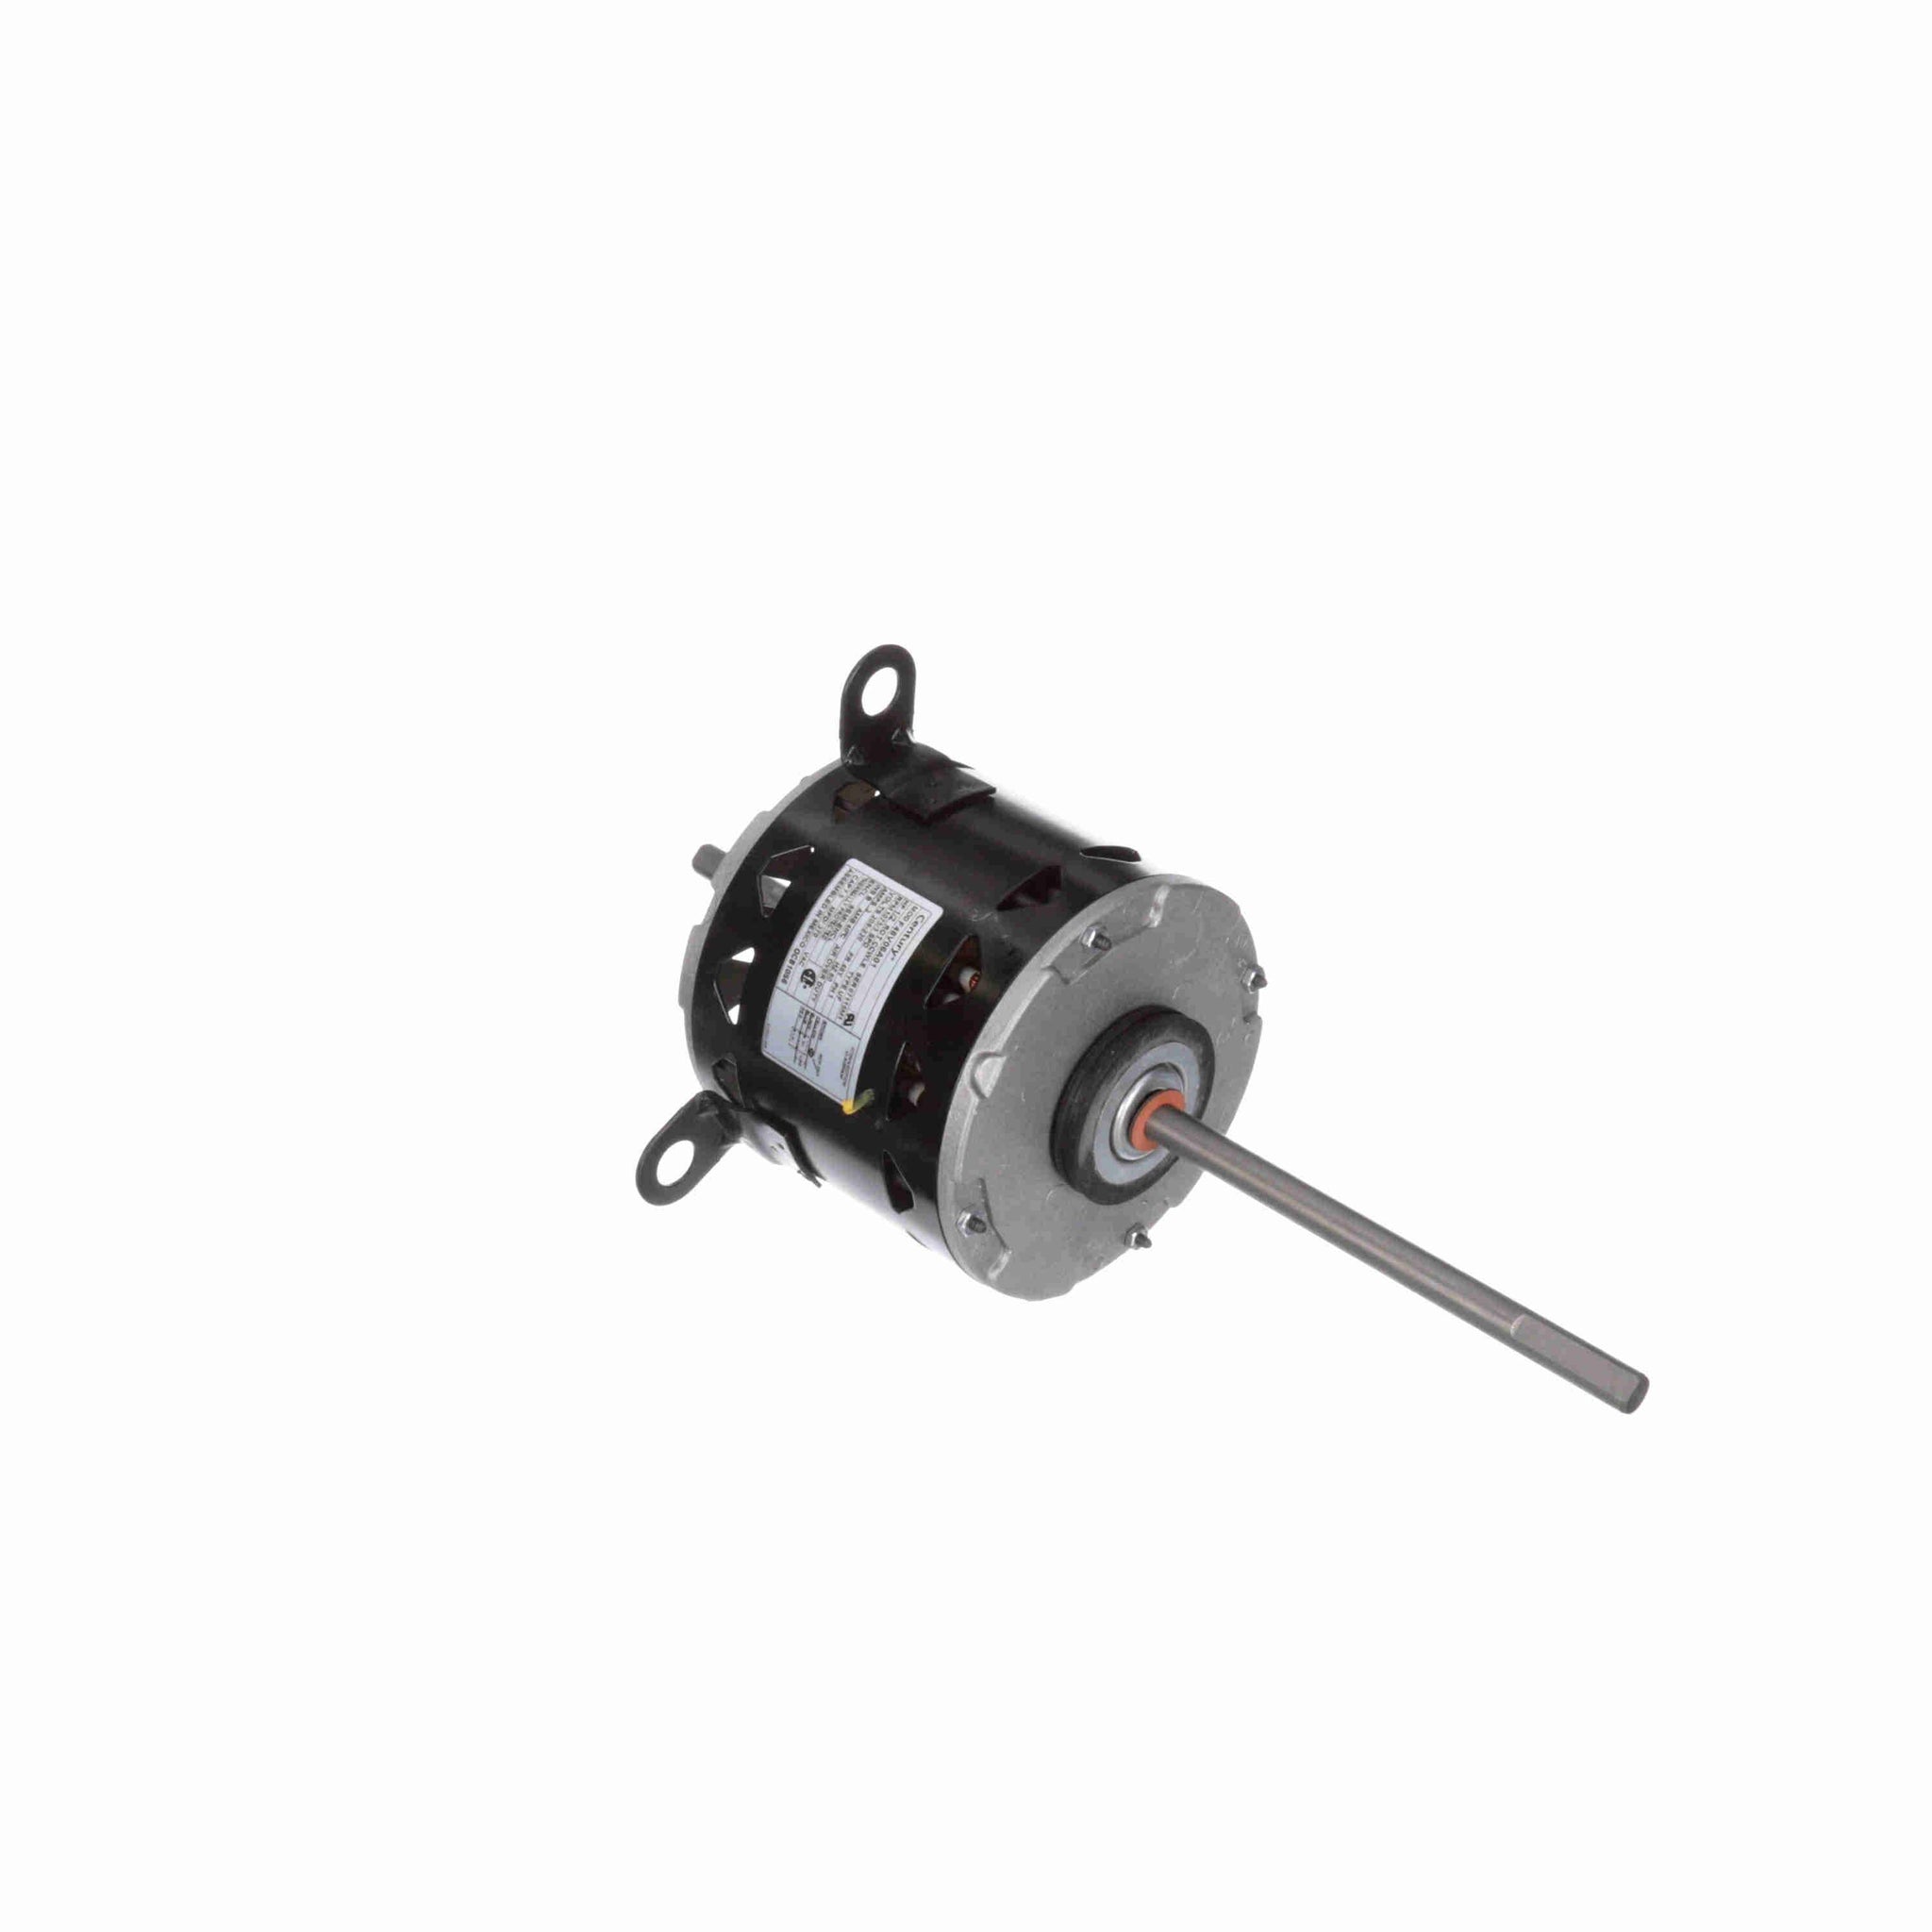 OCB1056 - 1/2 HP OEM Replacement Motor, 1075 RPM, 3 Speed, 208-230 Volts, 48 Frame, Semi Enclosed - Hardware & Moreee